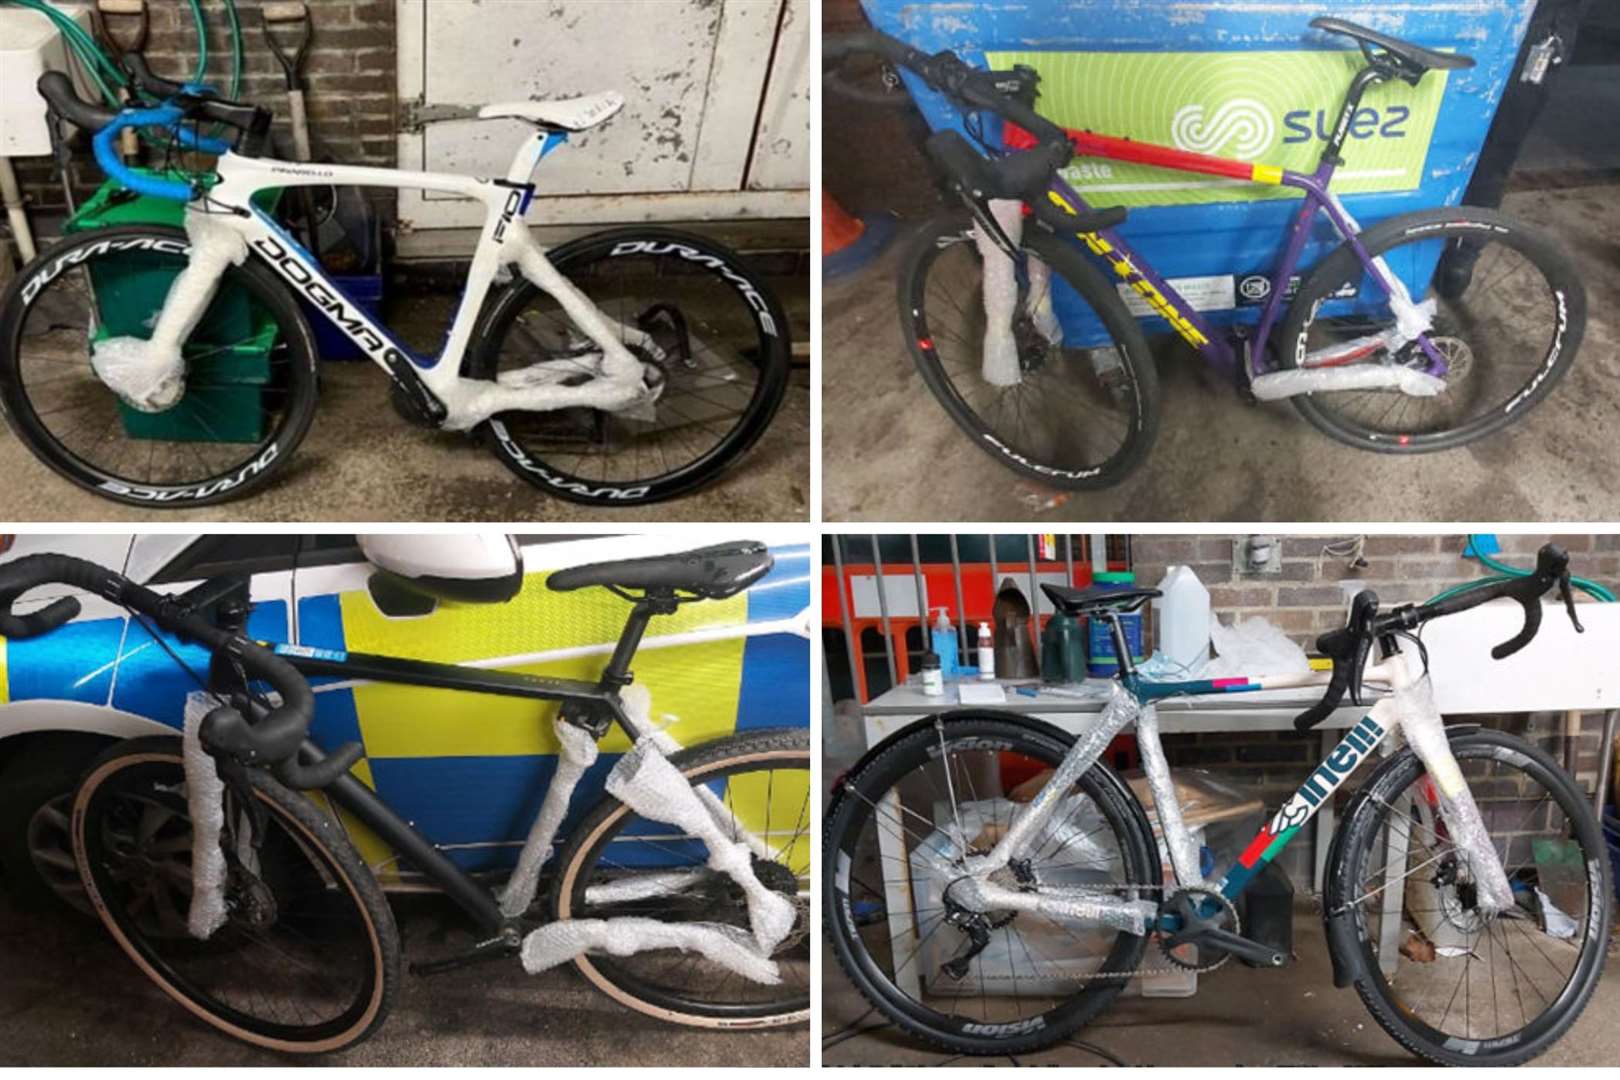 Six stolen bicycles were found at Stop 24 services. Picture: Kent Police